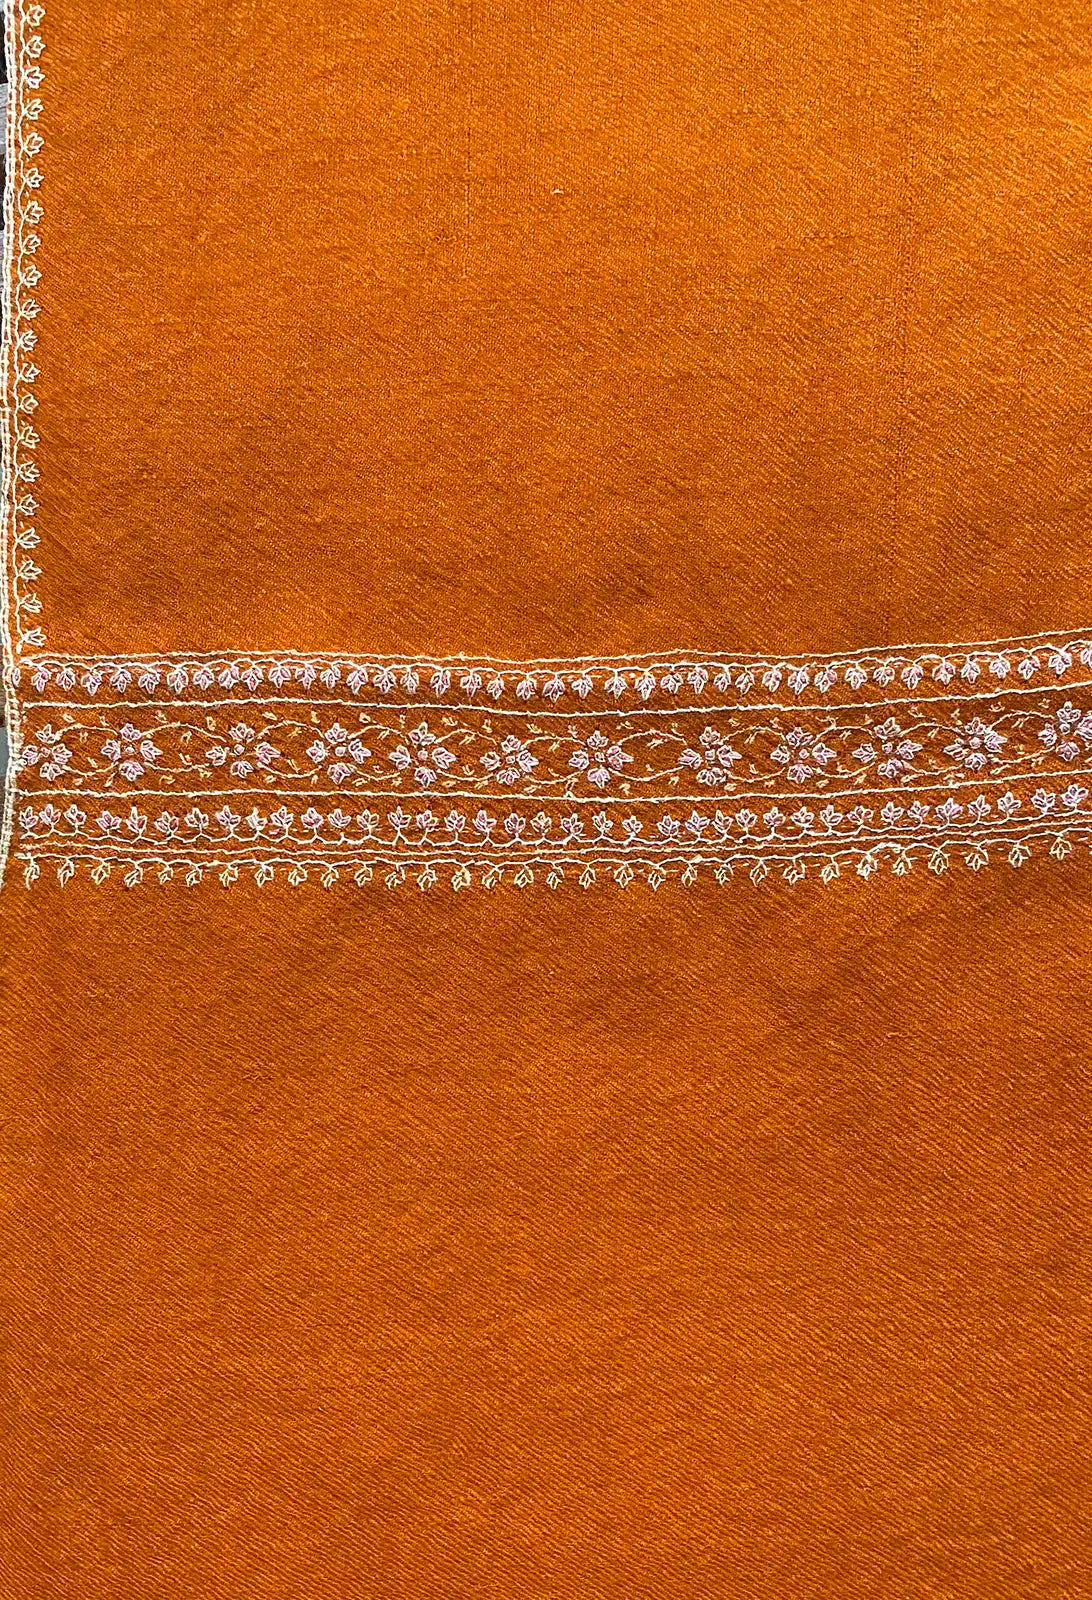 Pashmina stole in burnt orange with light border embroidery